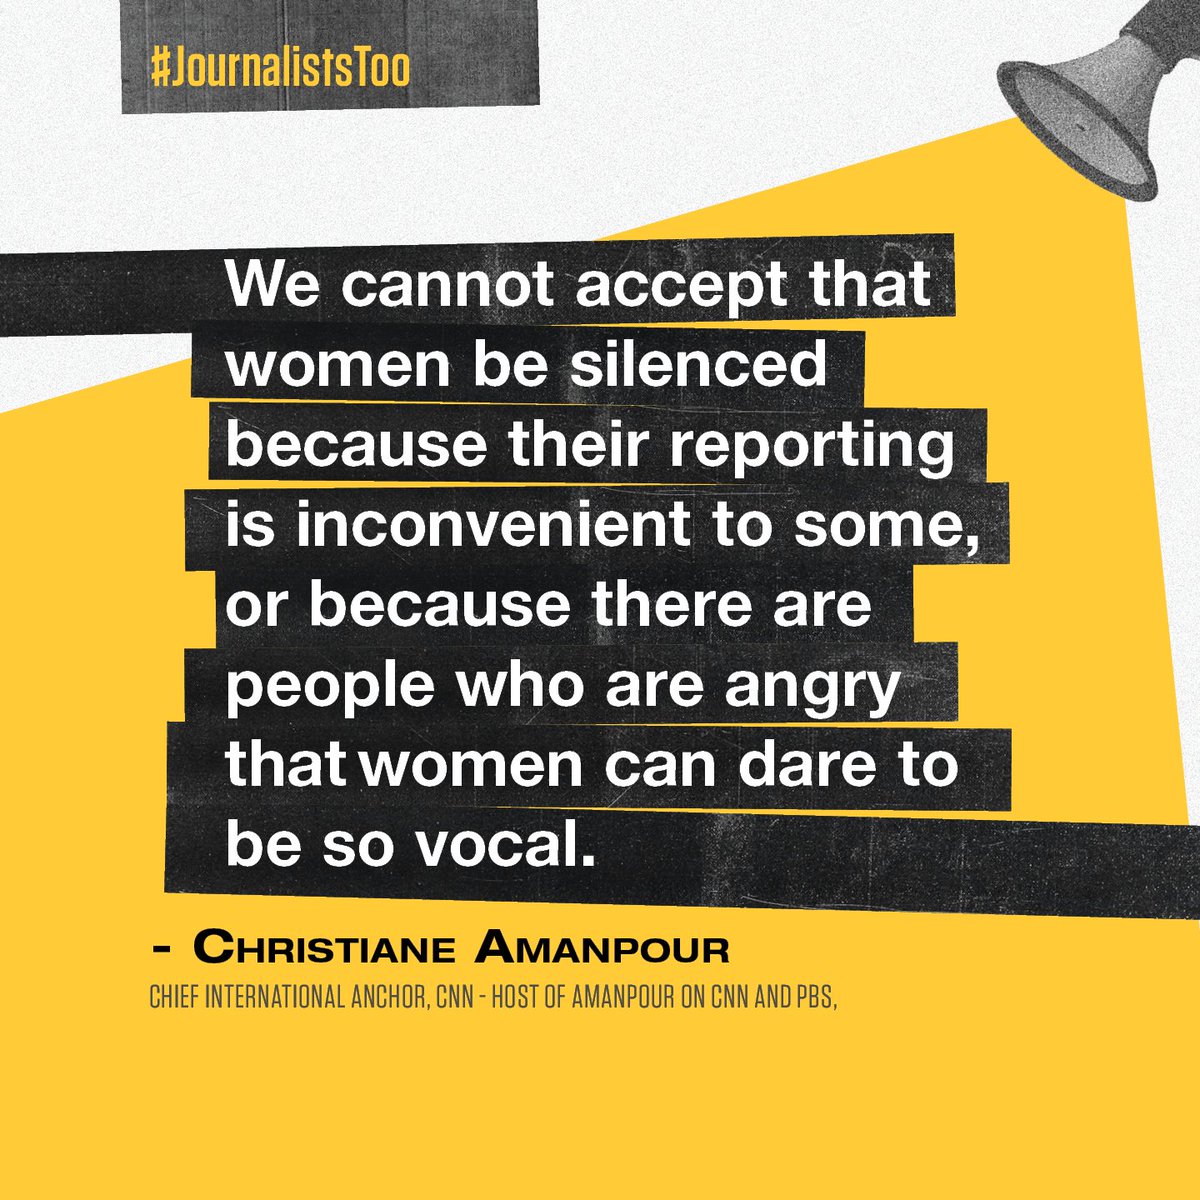 Today is International Day for the Elimination of Violence Against Women. 

Female journalists continue to face gender-based attacks and violence -- it is never acceptable.

#JournalistsToo @UNESCO

srfreedex.org/journalists-to…